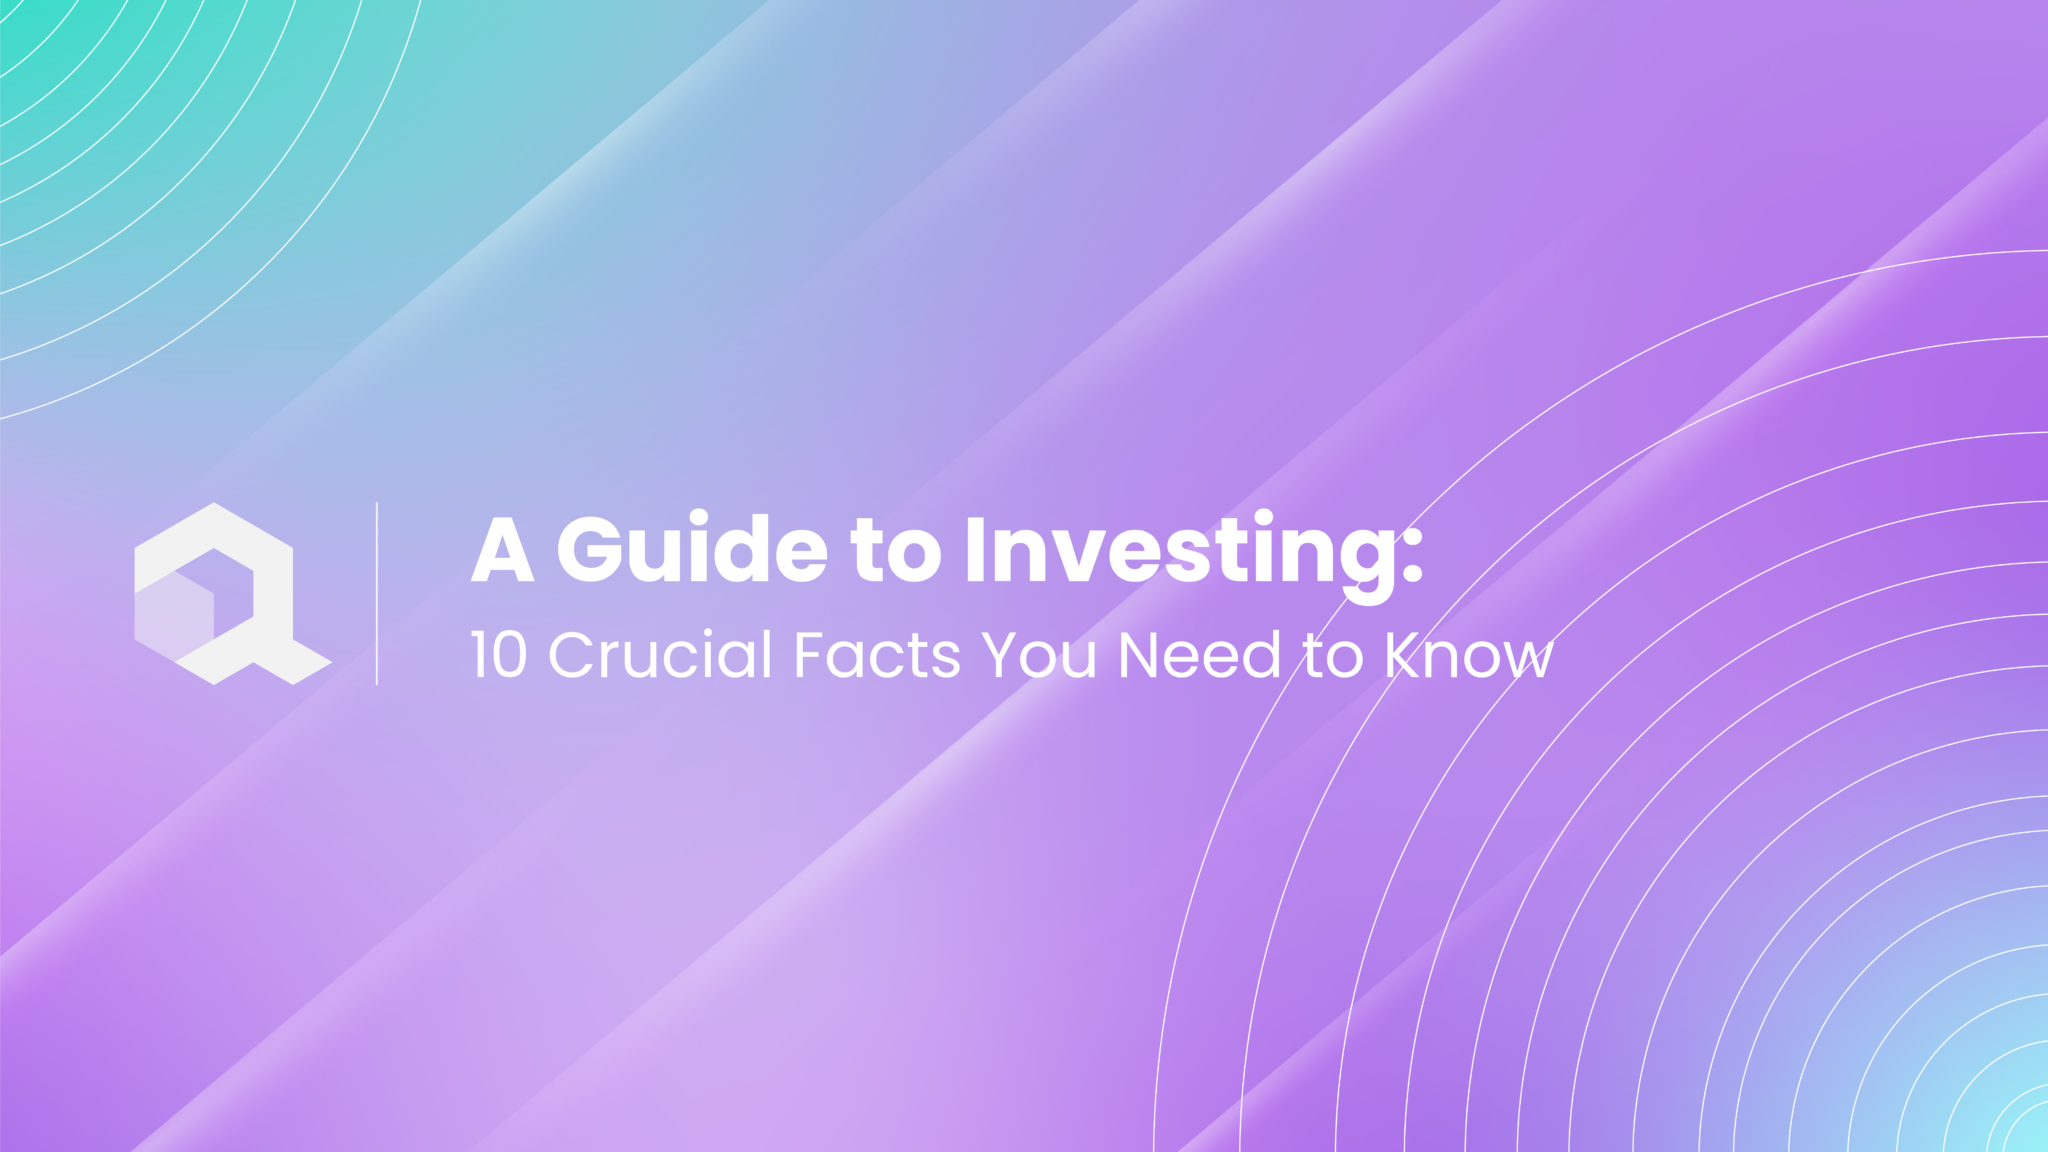 10 Facts About Investing You Should Know